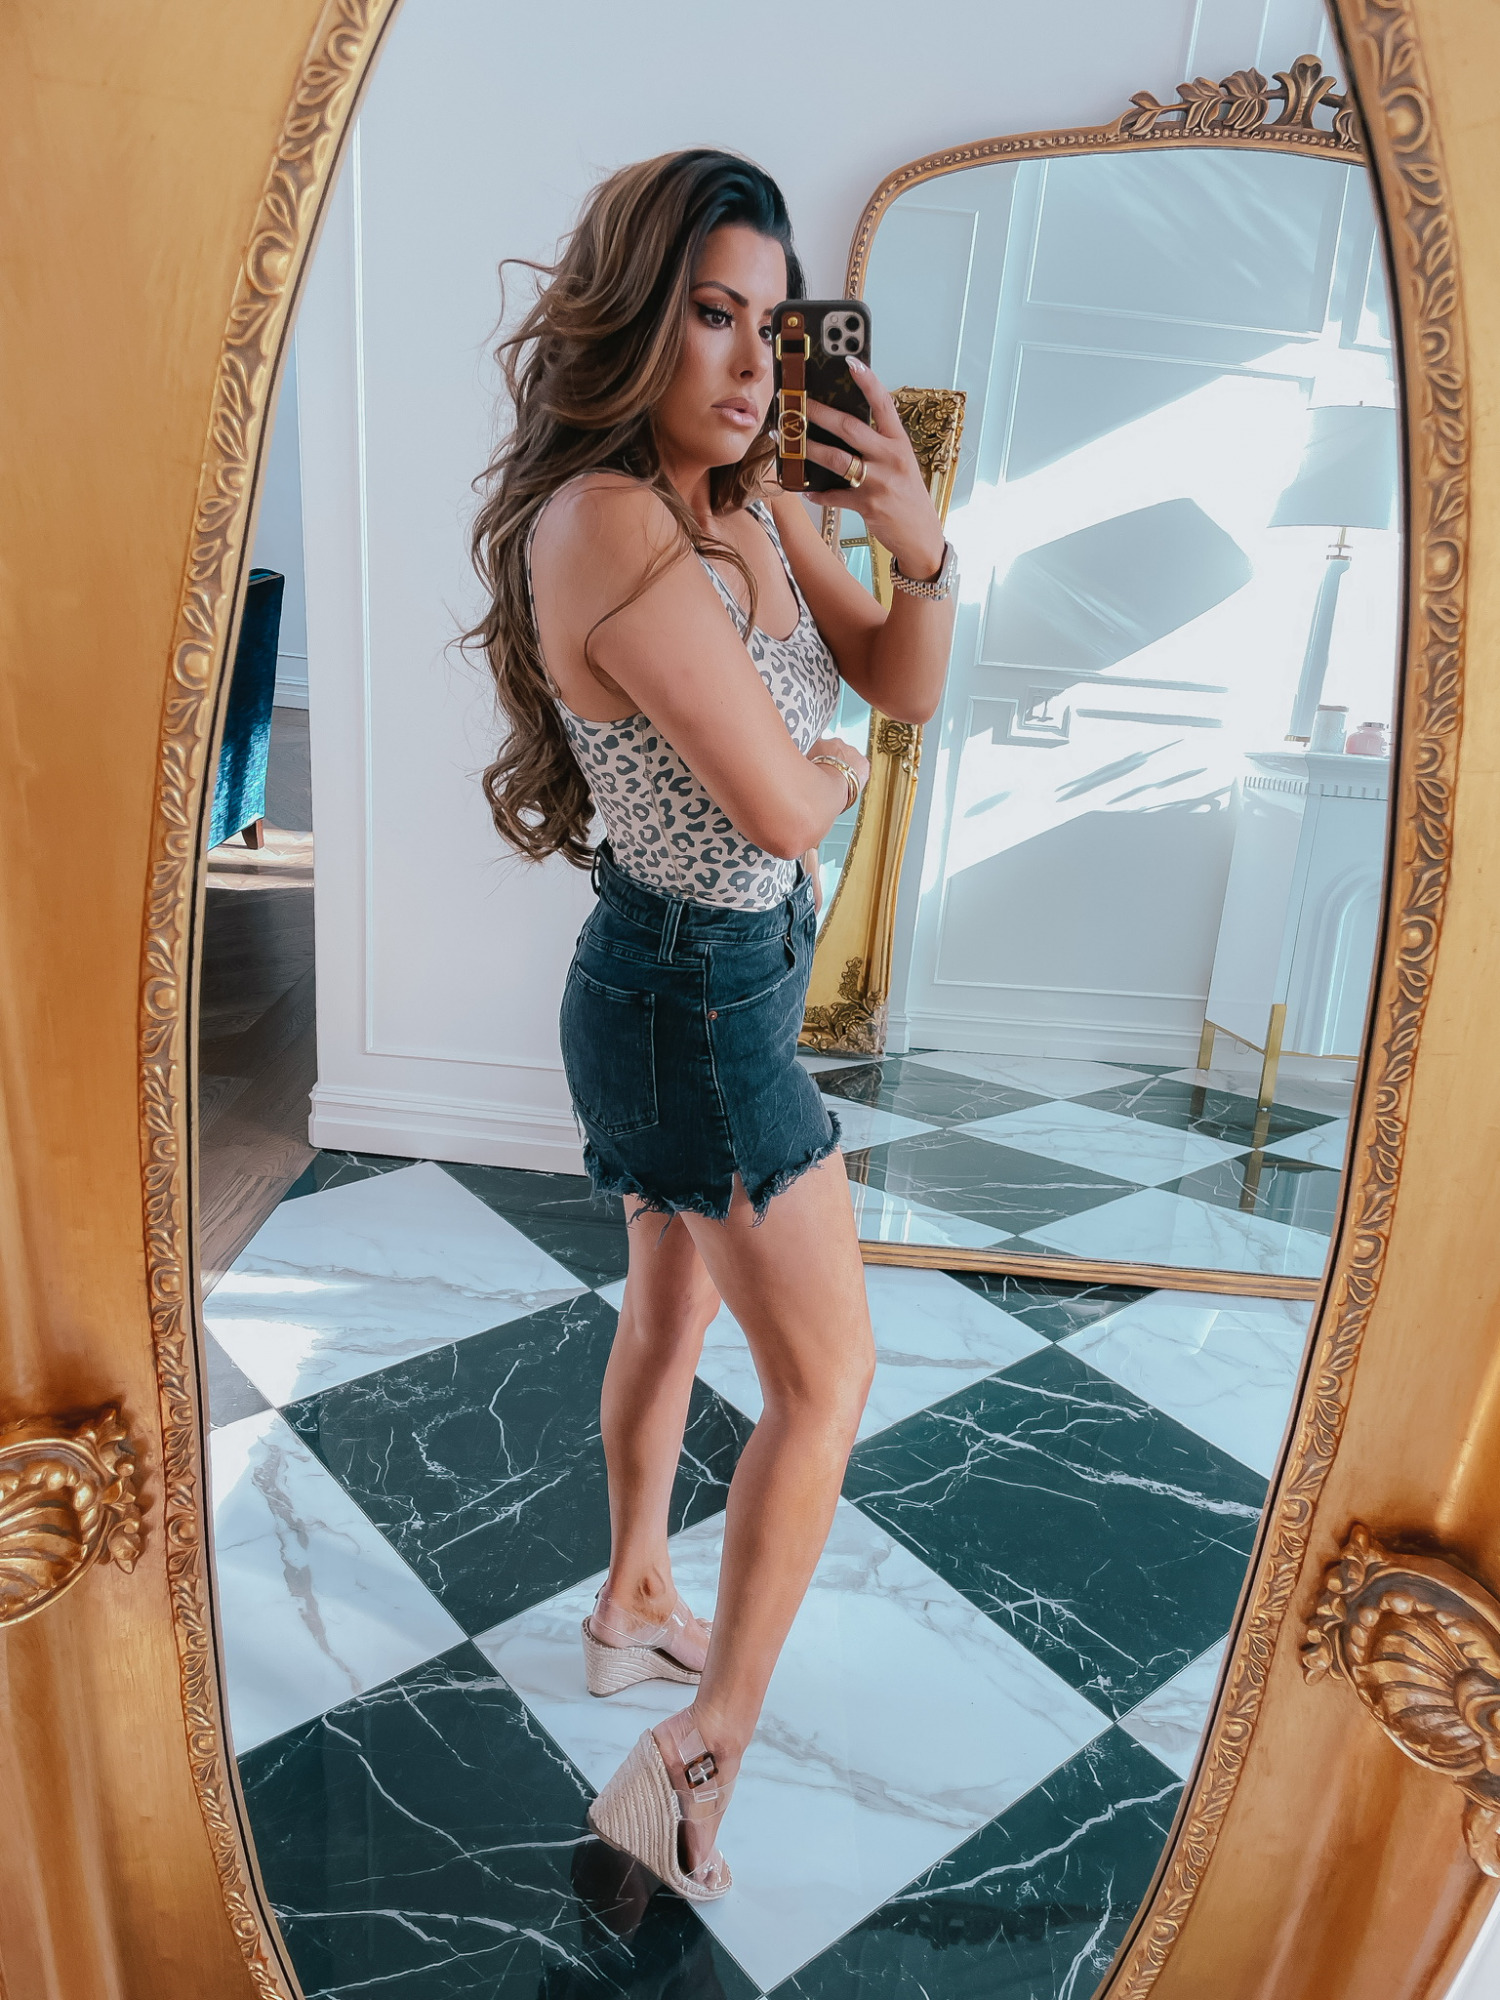 Emily-ann-gemma-abercrombie-sale-jean-shorts-bodysuit-summer-outfit-ltk-day-sale | June Instagram Recap by popular US fashion blog, The Sweetest Thing: image of Emily Gemma wearing a leopard print body suit, black distressed shorts and clear strap wedges. 